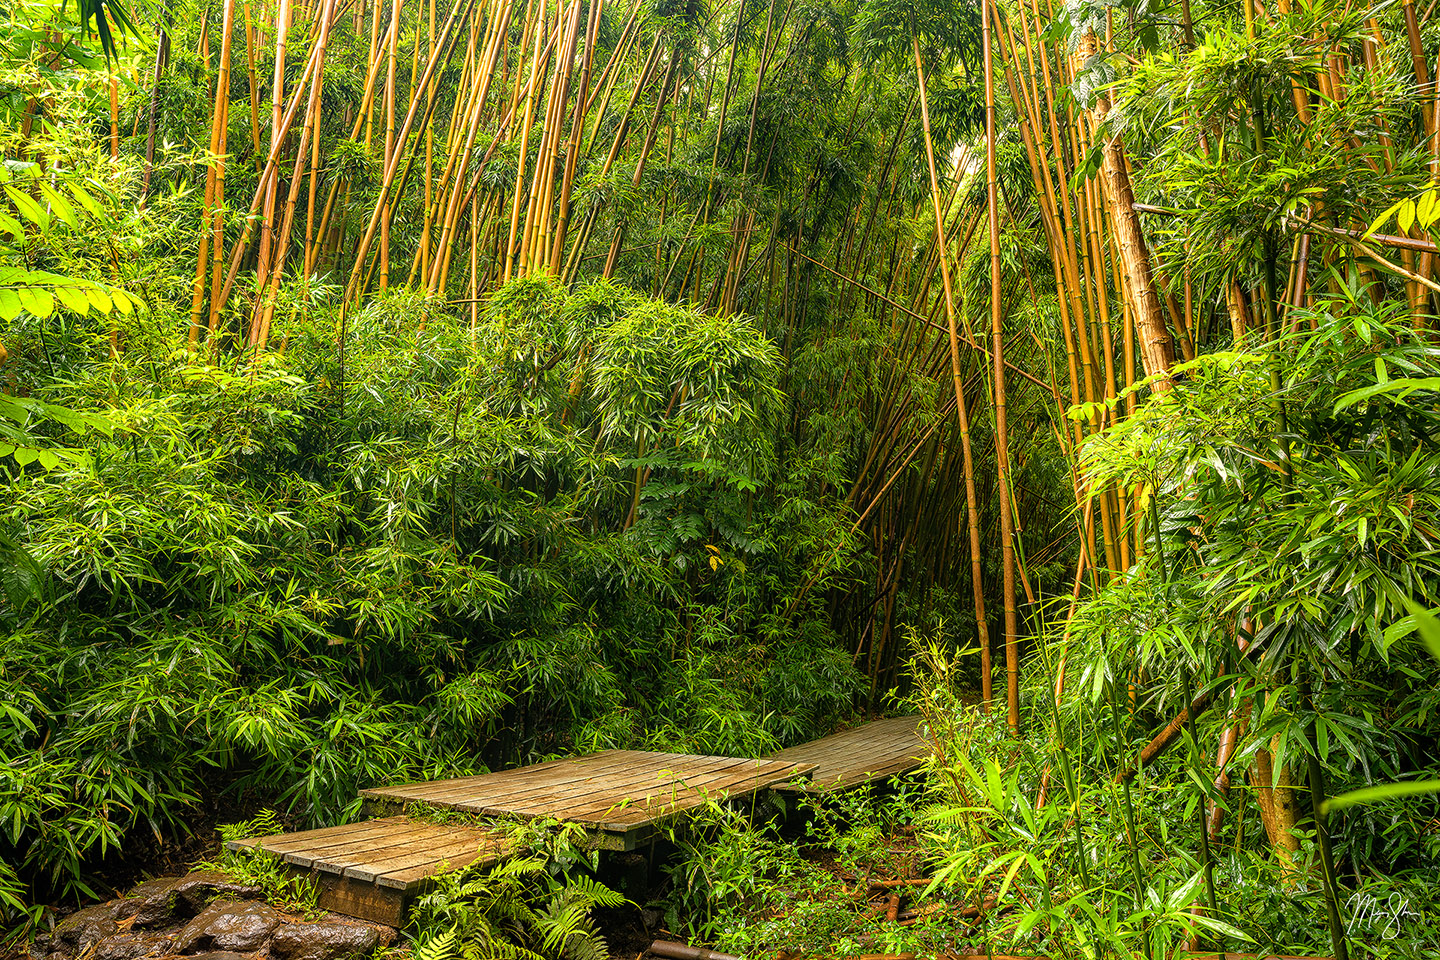 Into the Bamboo